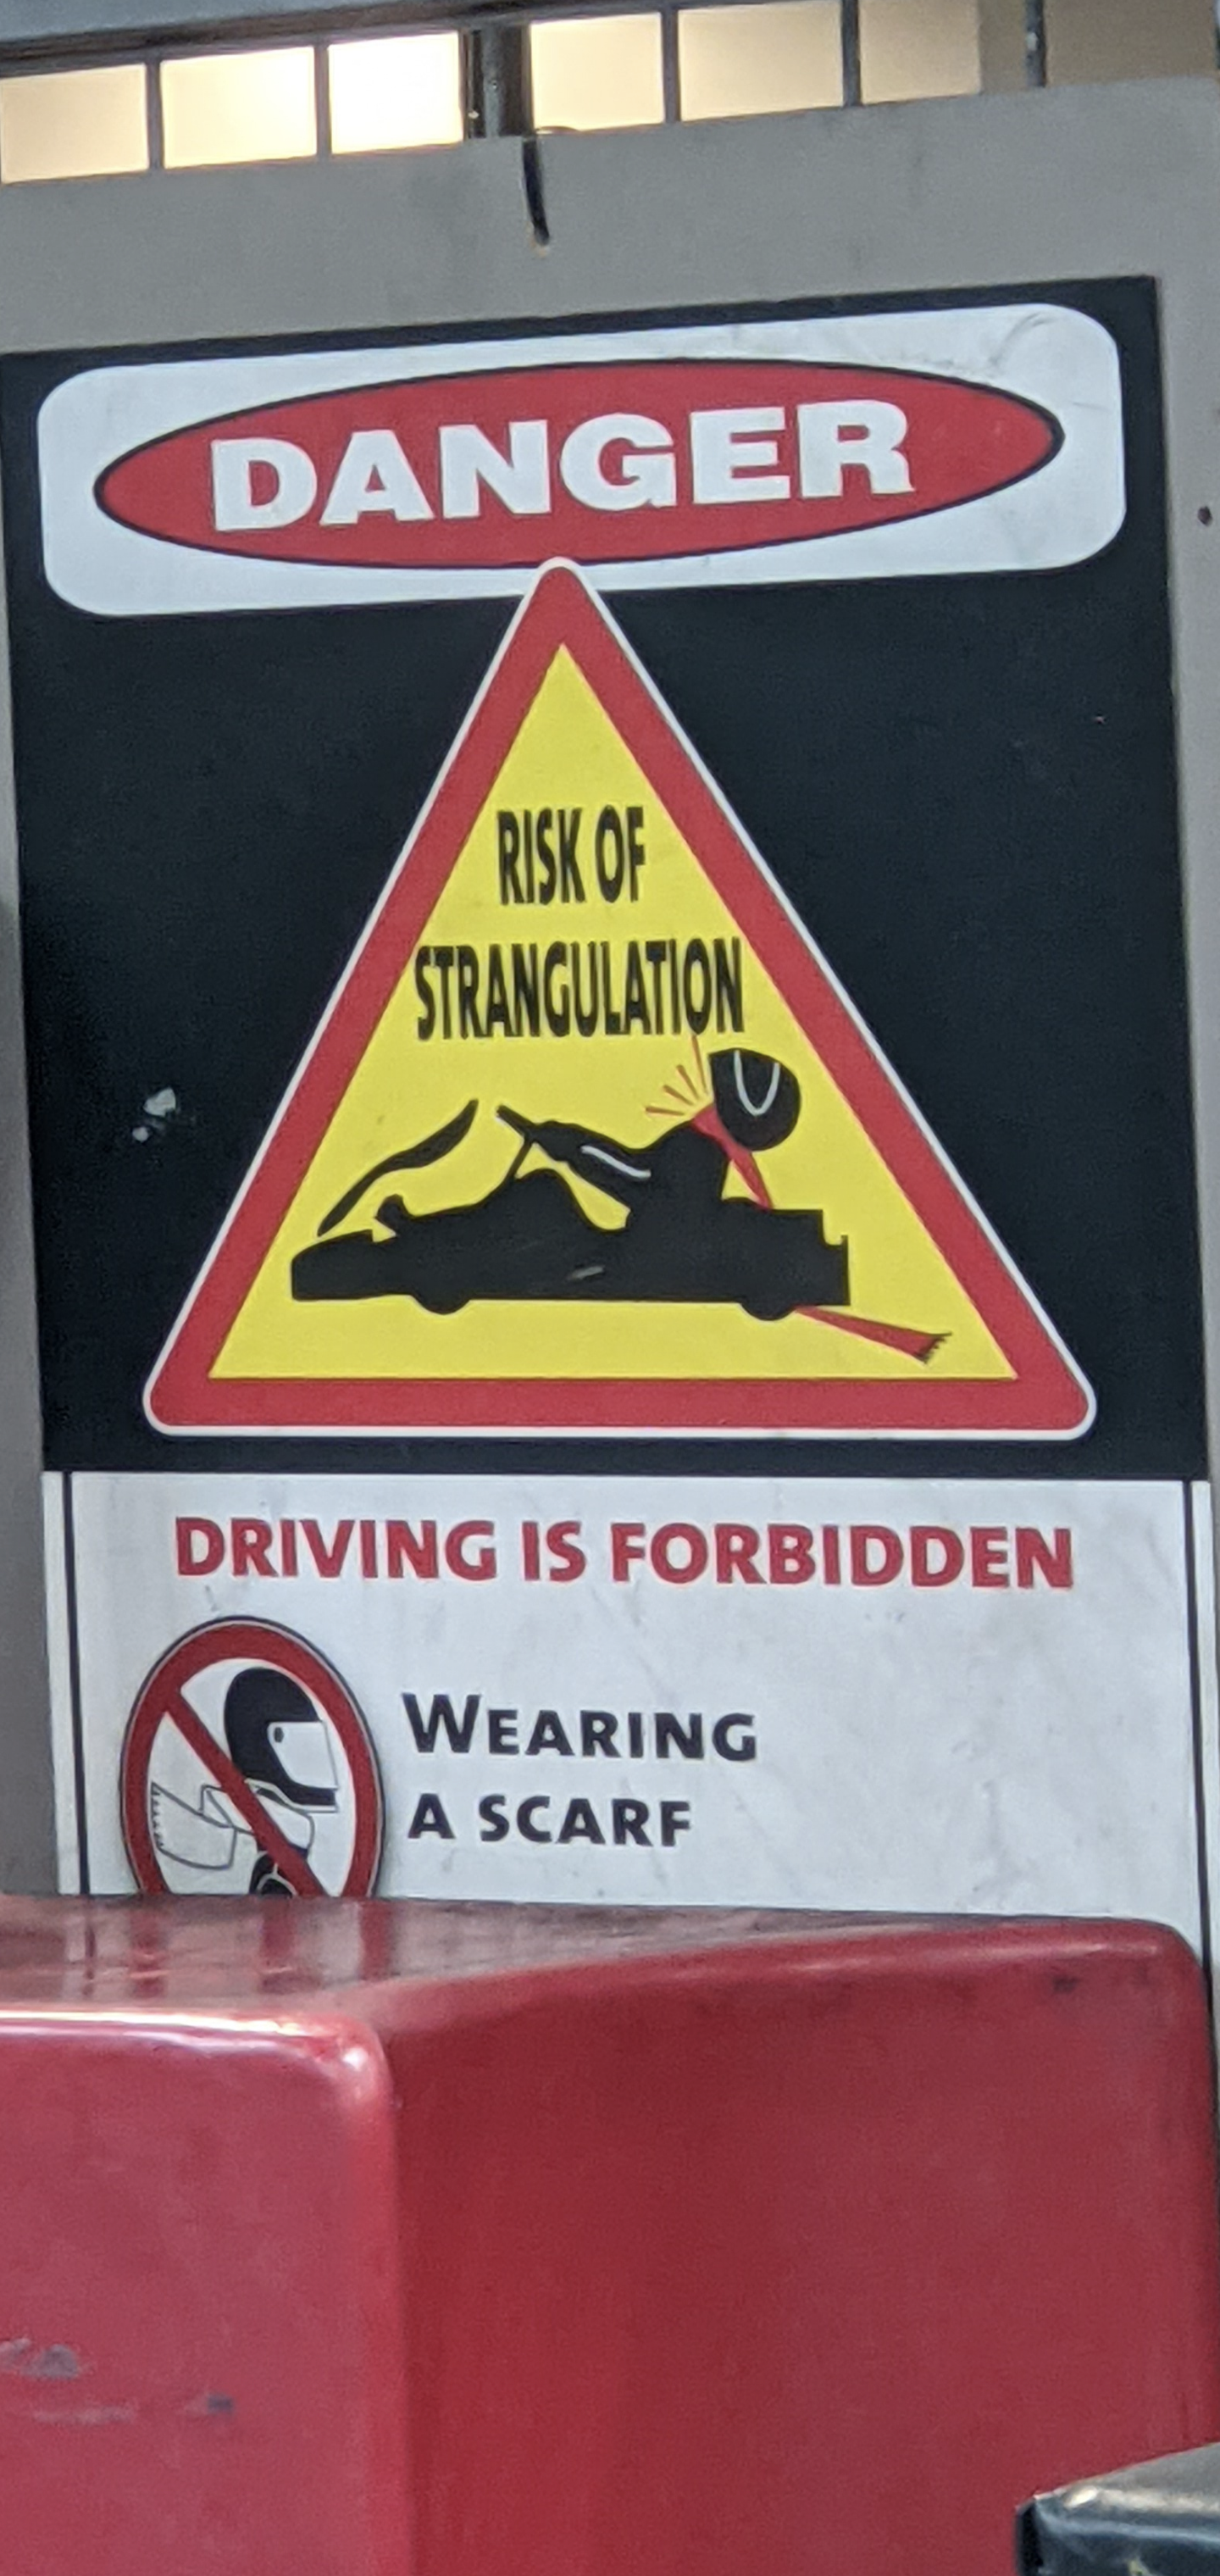 a sign with a yellow triangle and black text